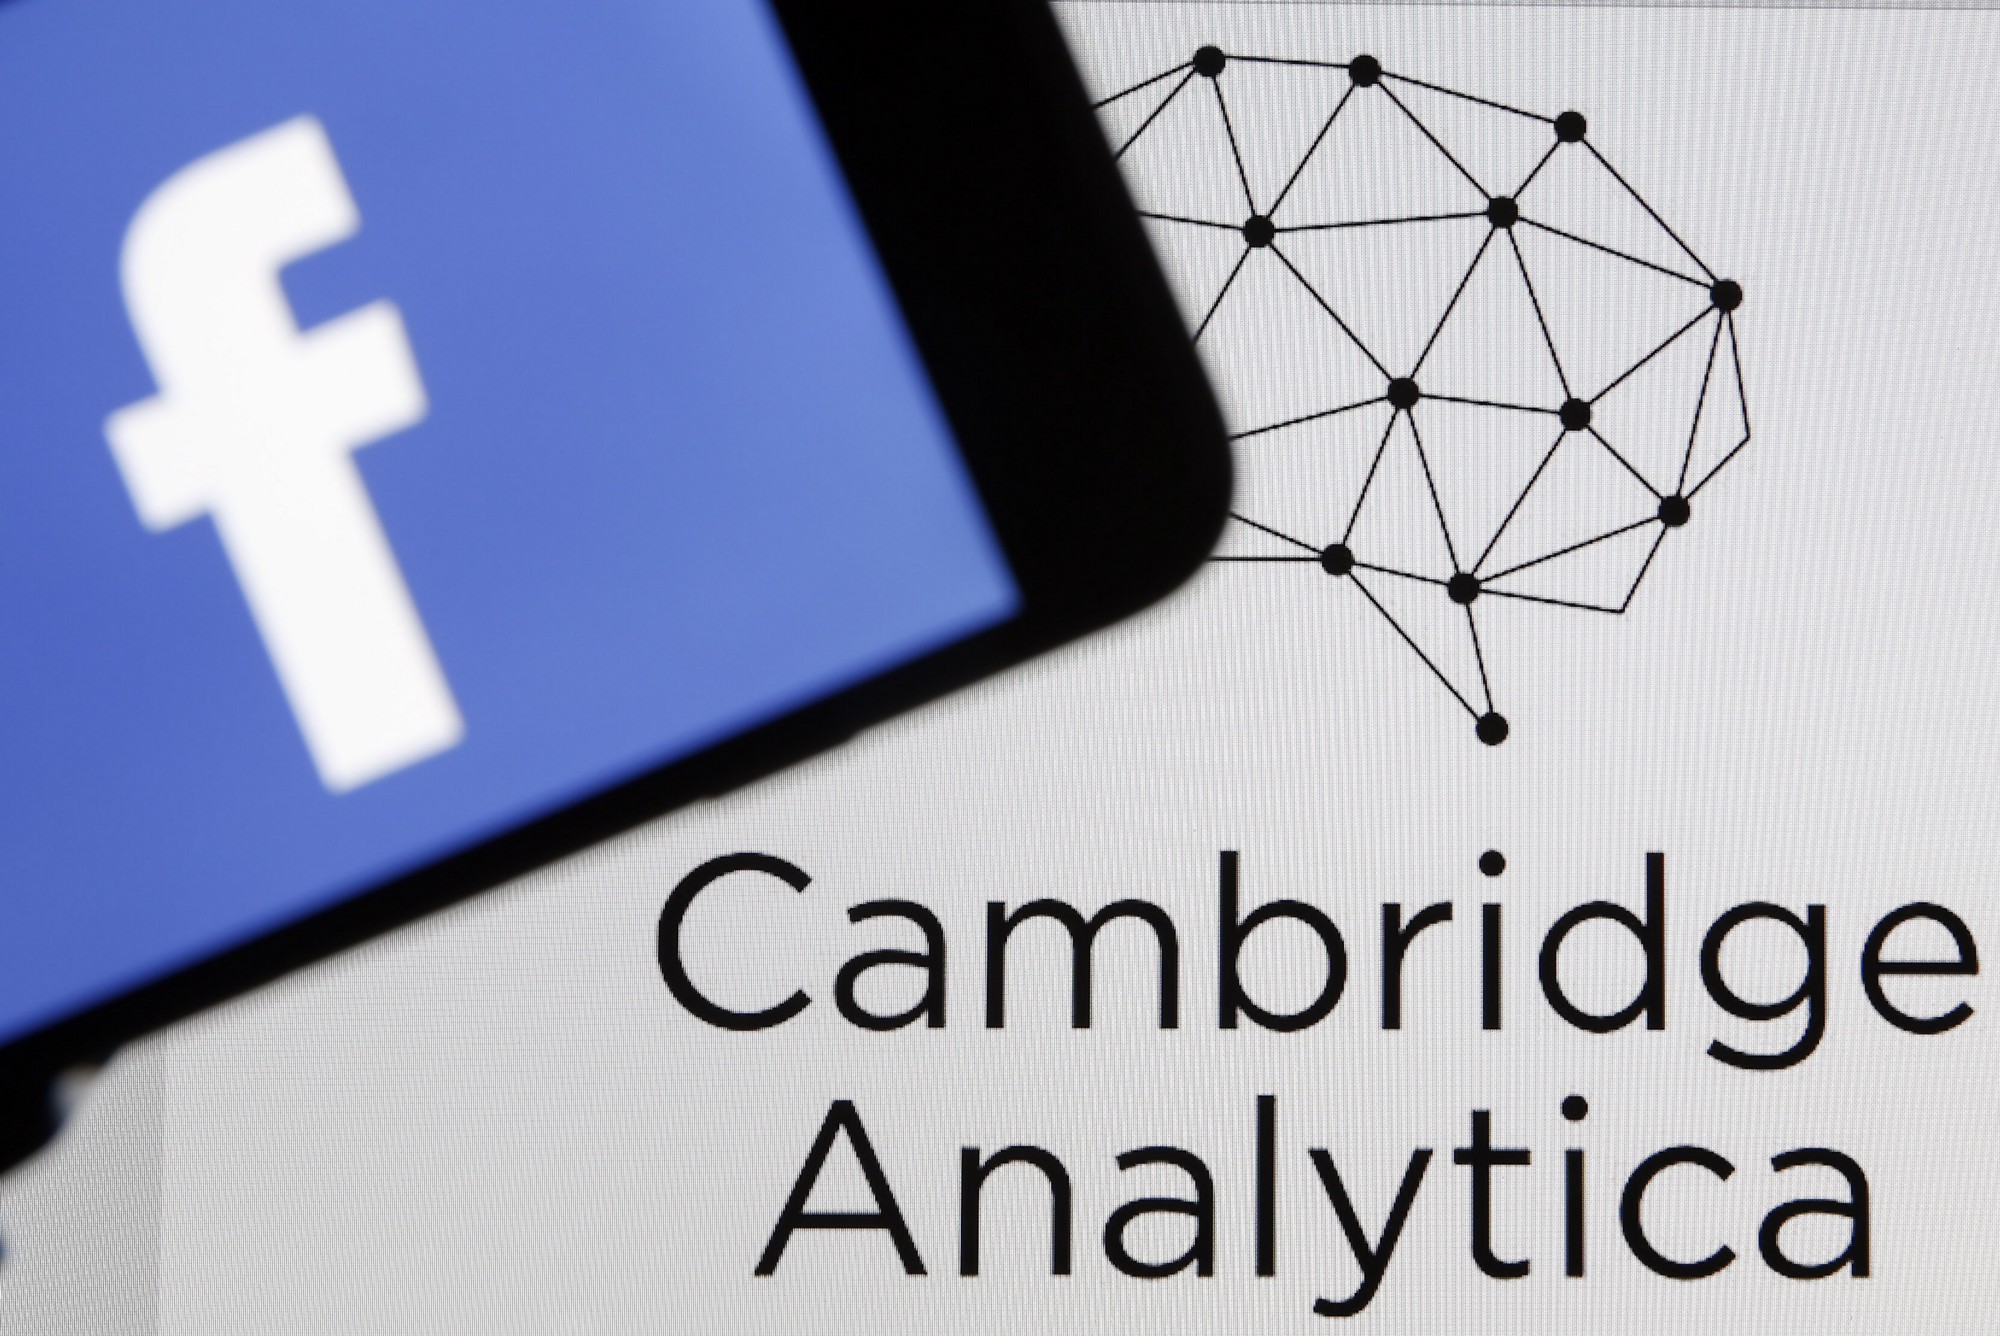 Whether Your Facebook Data Was Shared With Cambridge Analytica?